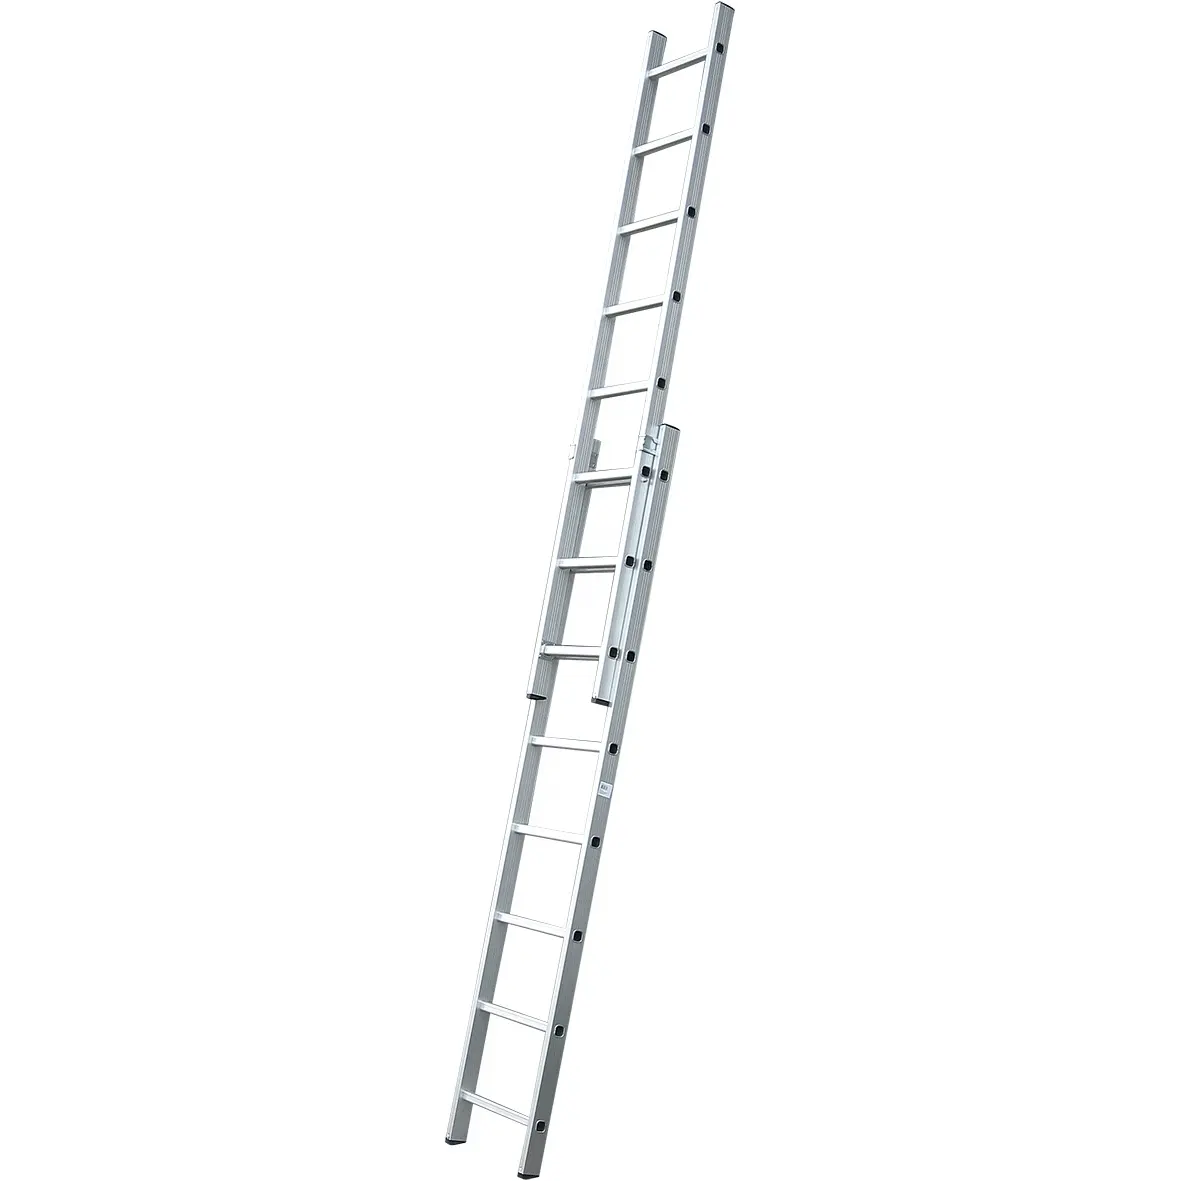 High quality two section aluminium prfofile combination ladders with a durablea and rus-resisant surface